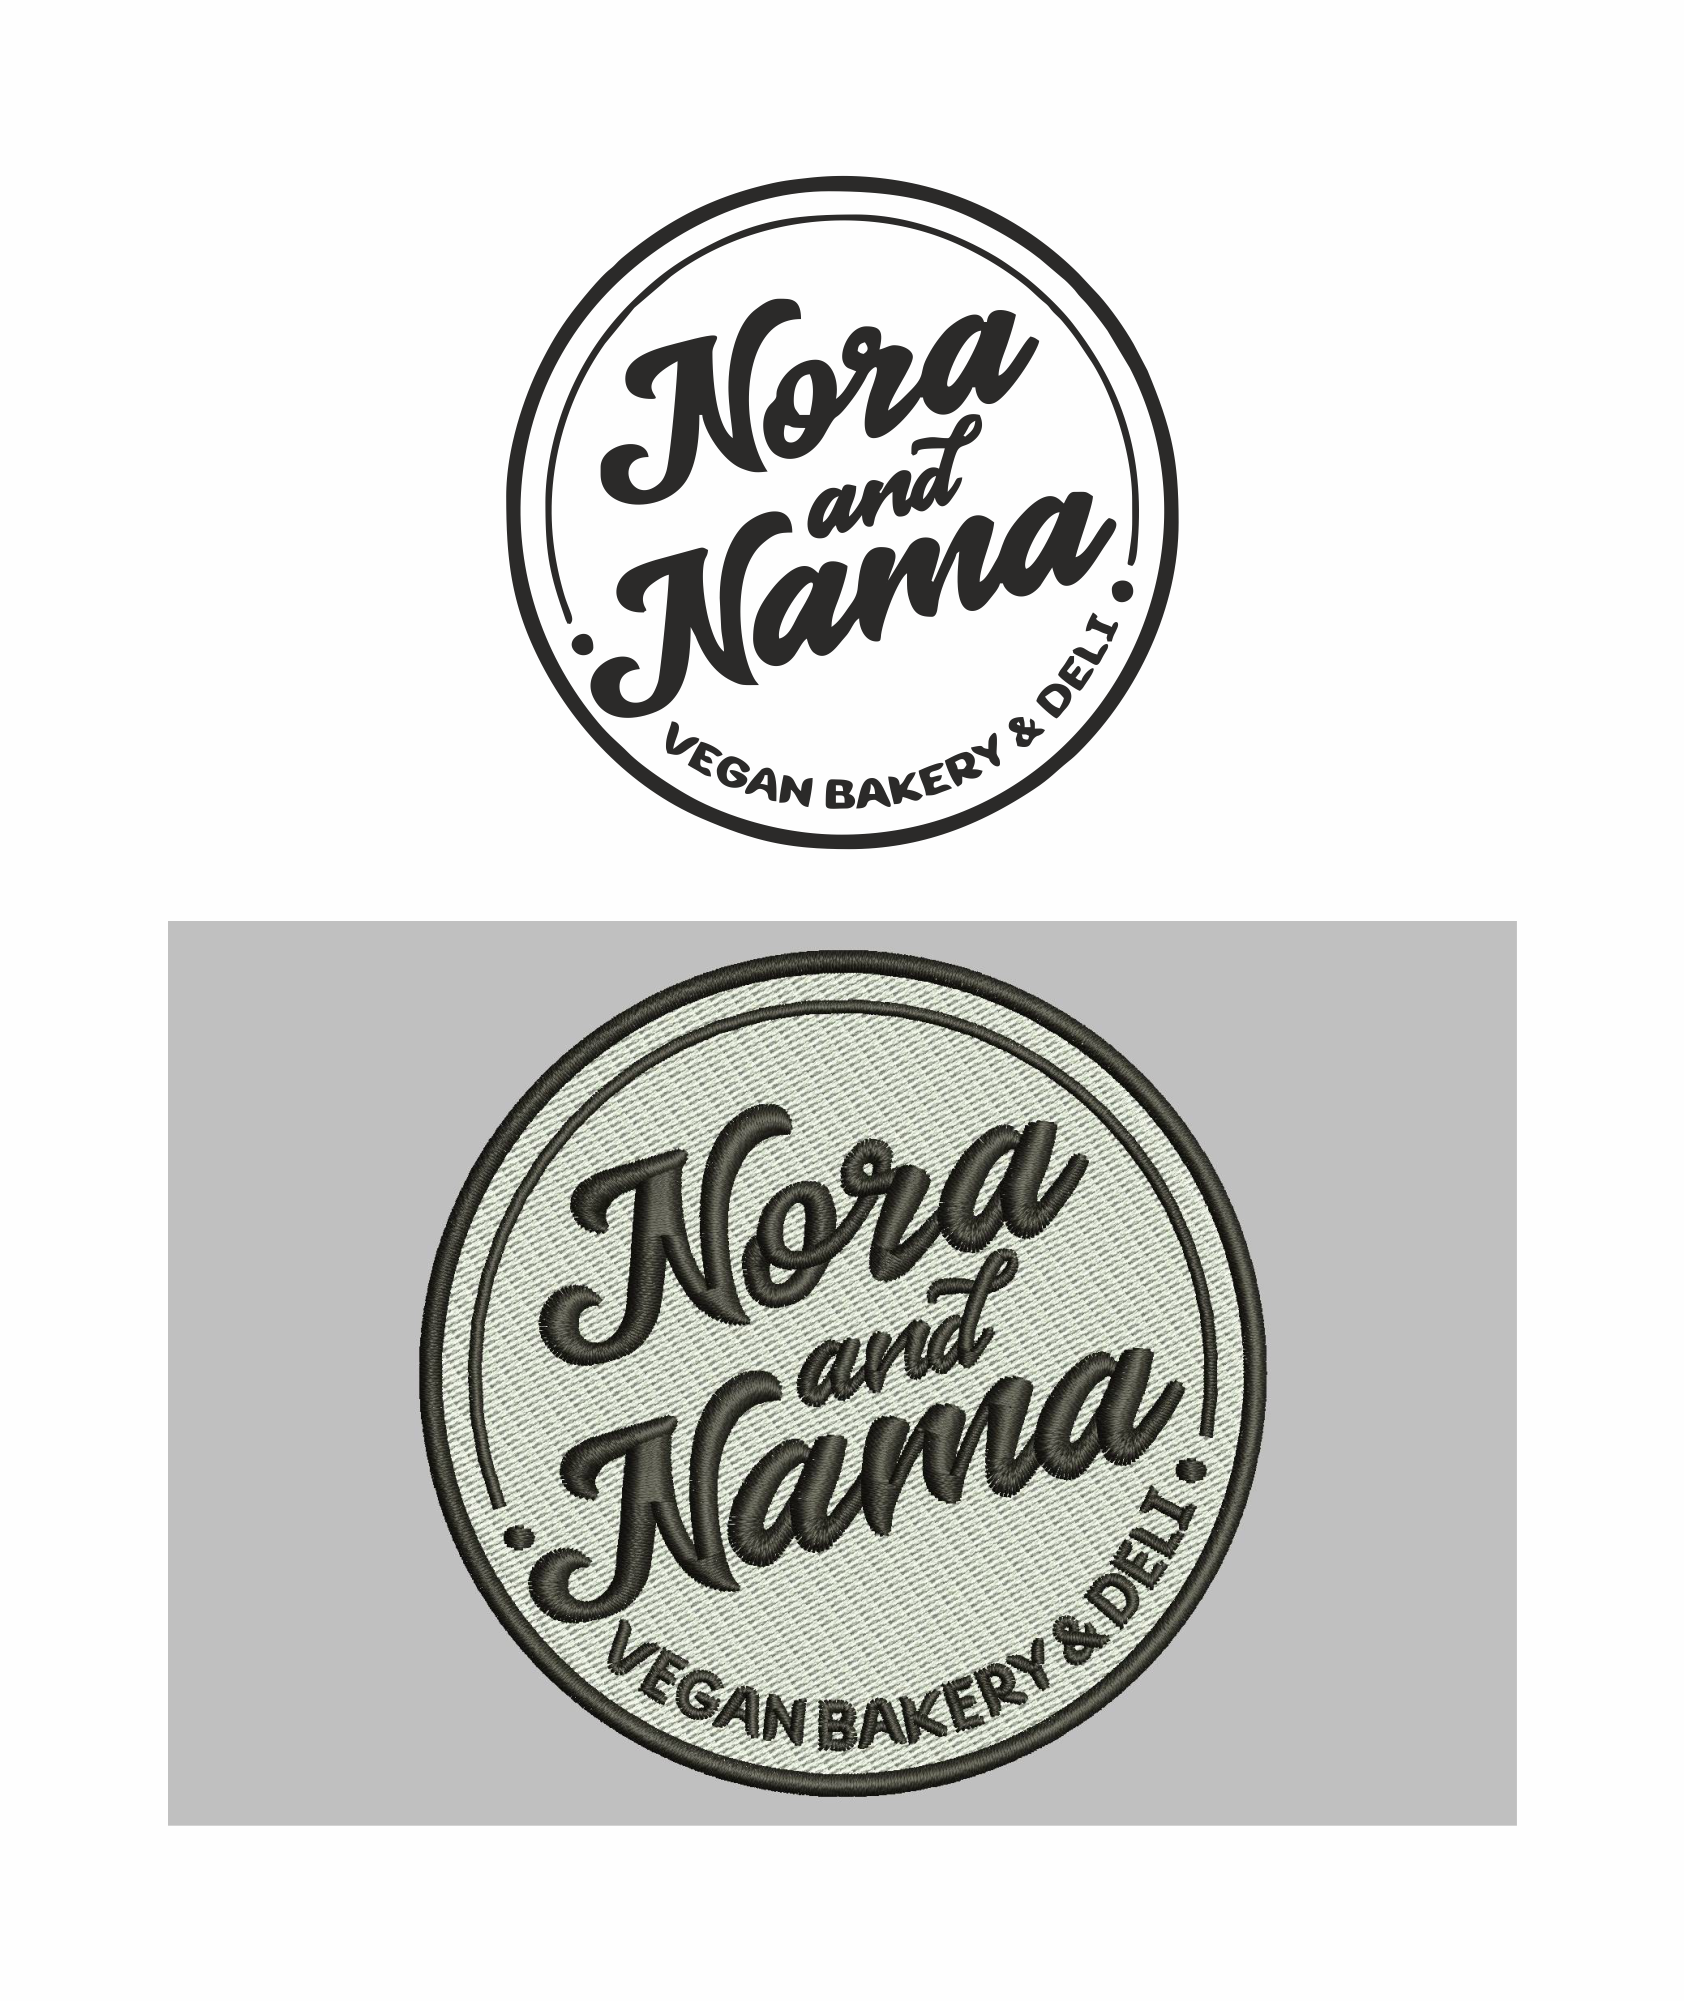 nora_and_norma_bakery.png